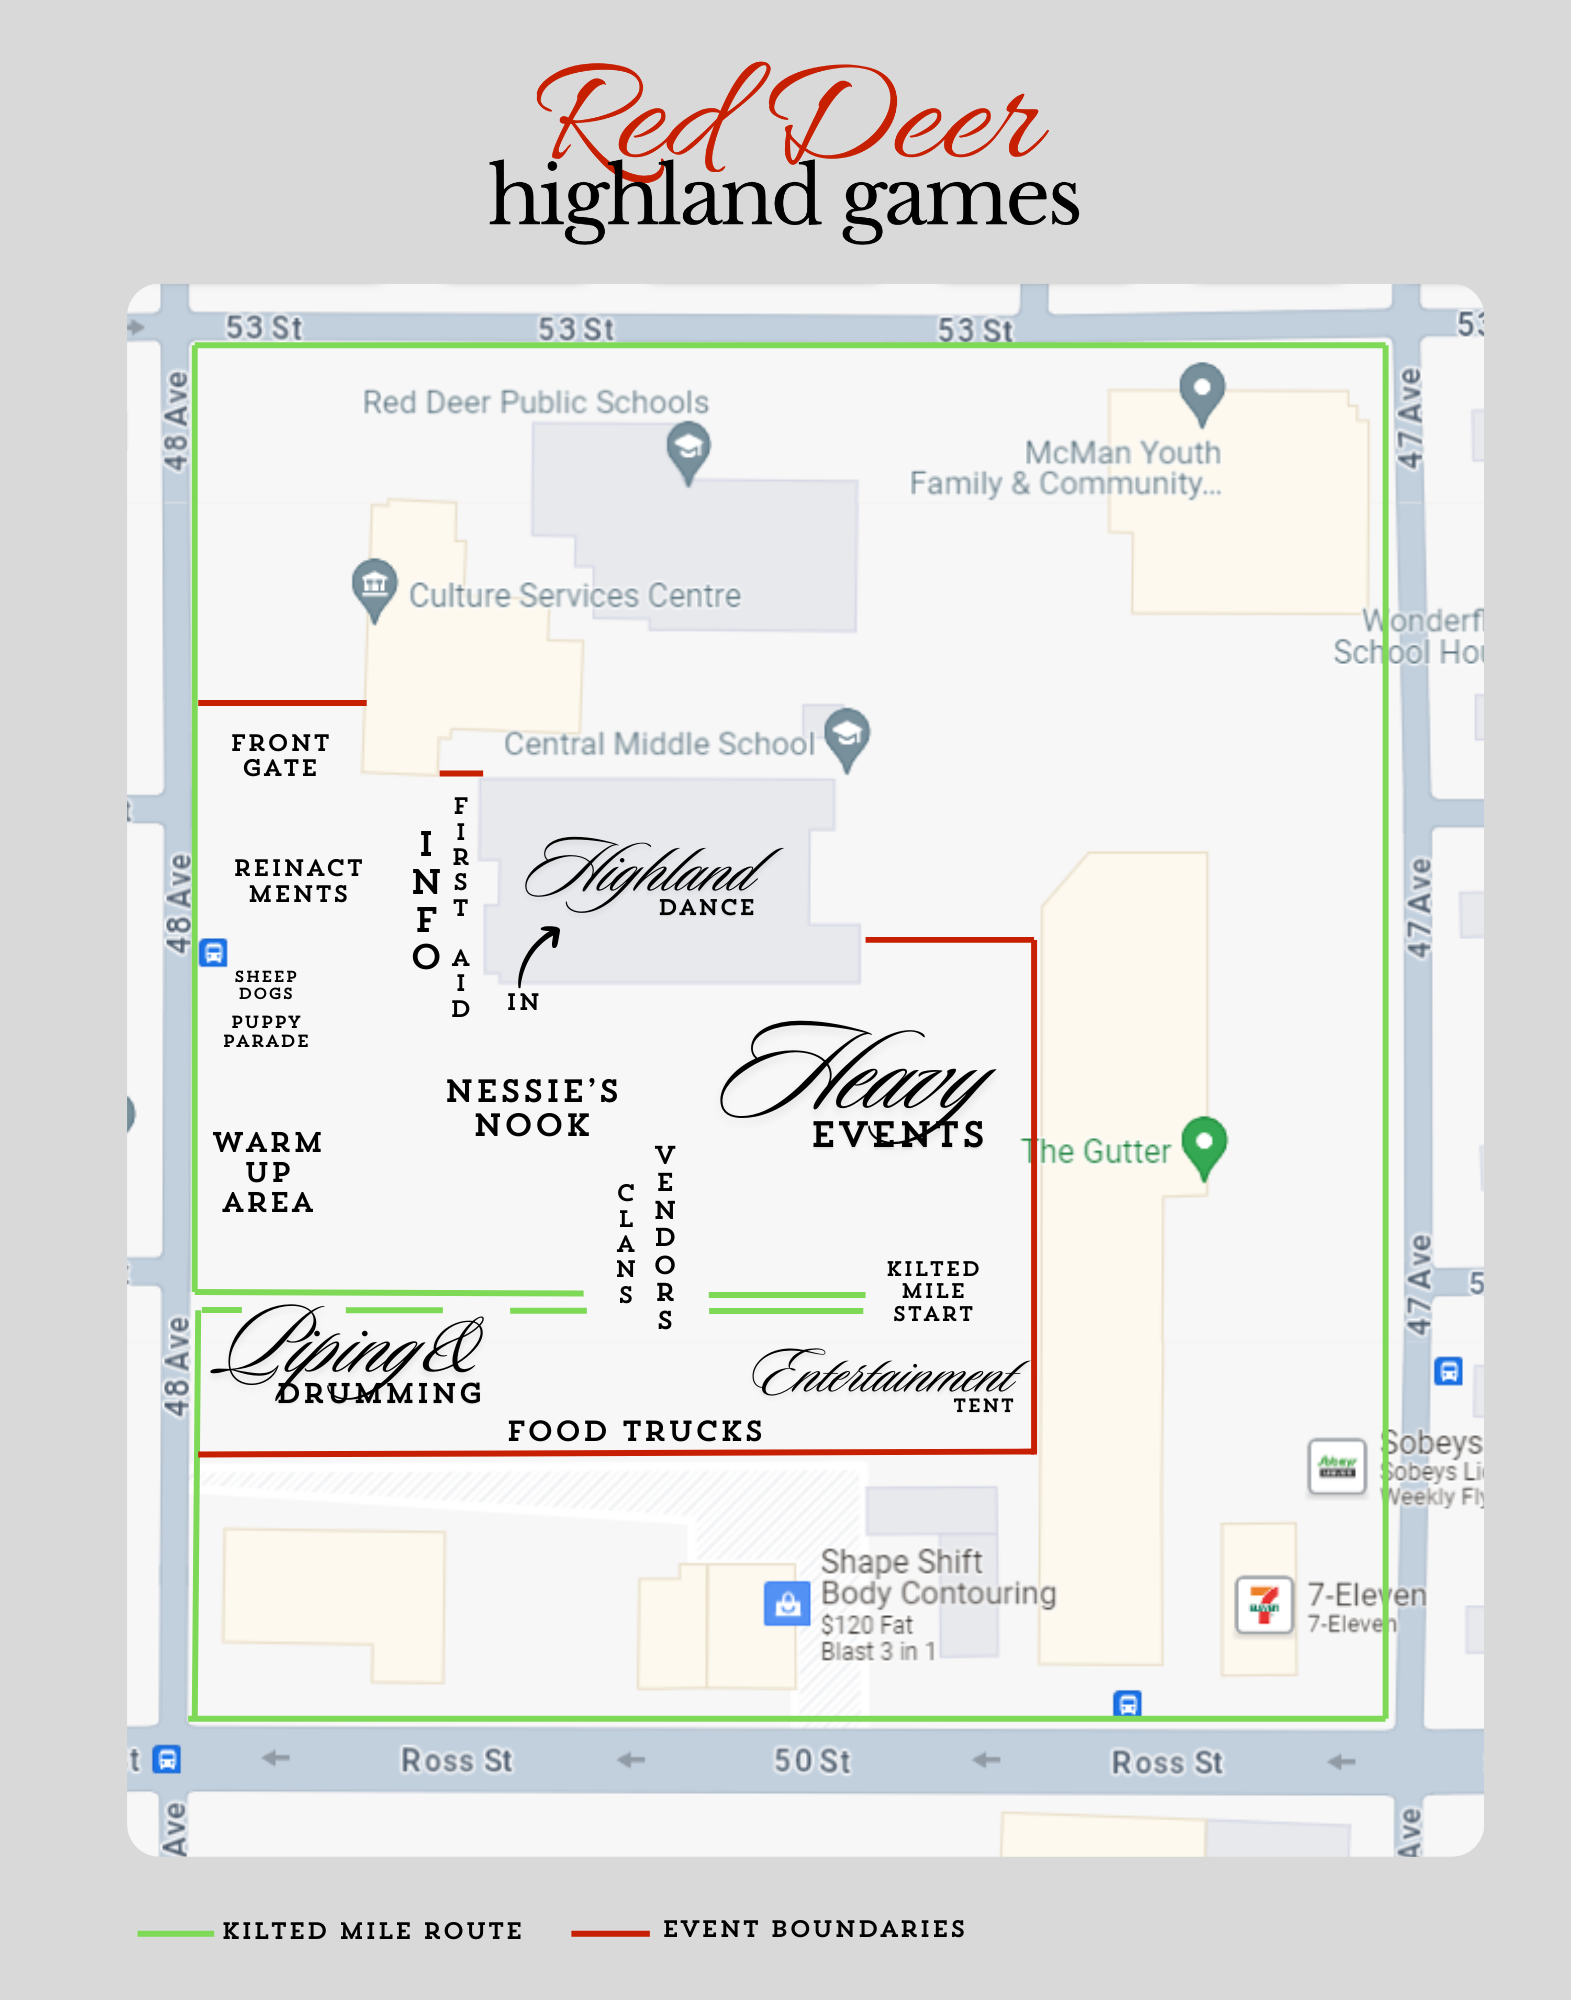 RDHG site map